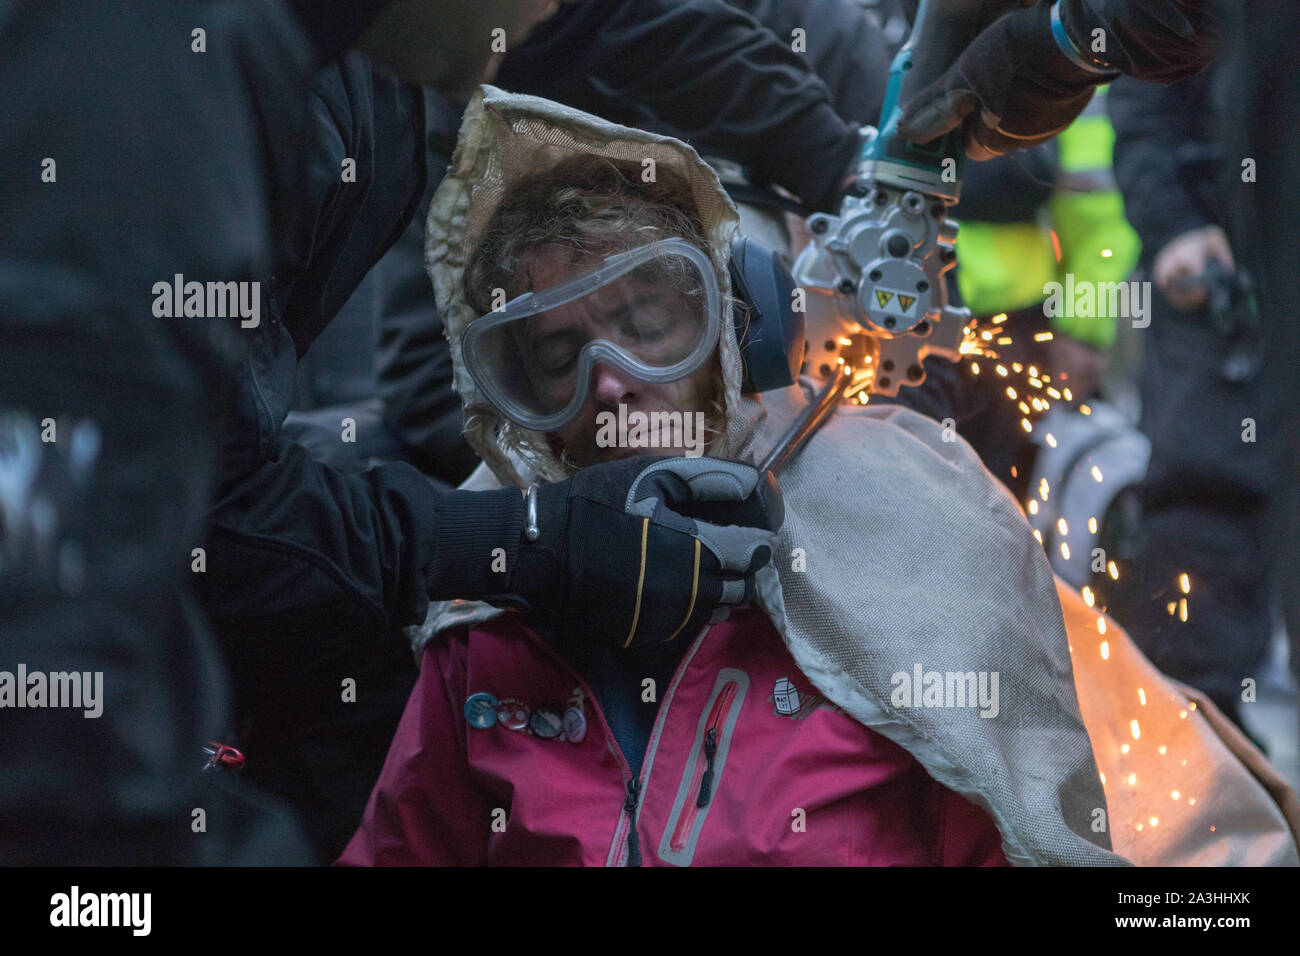 Westminster, London, UK. 8th Oct, 2019. Extinction rebellion protesters locked together on Whitehall, Westminster. Police use cutting gear to set them free. Penelope Barritt/Alamy Live News Stock Photo